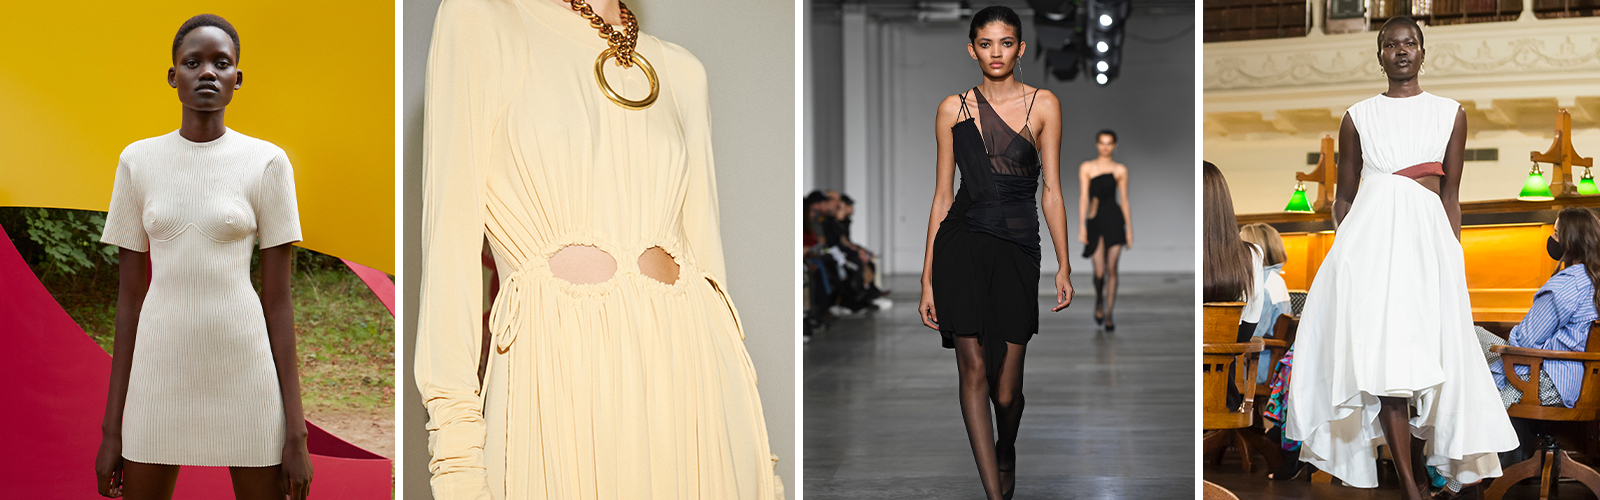 The Dress Report: 10 Names and Trends to Watch Out for in 2021